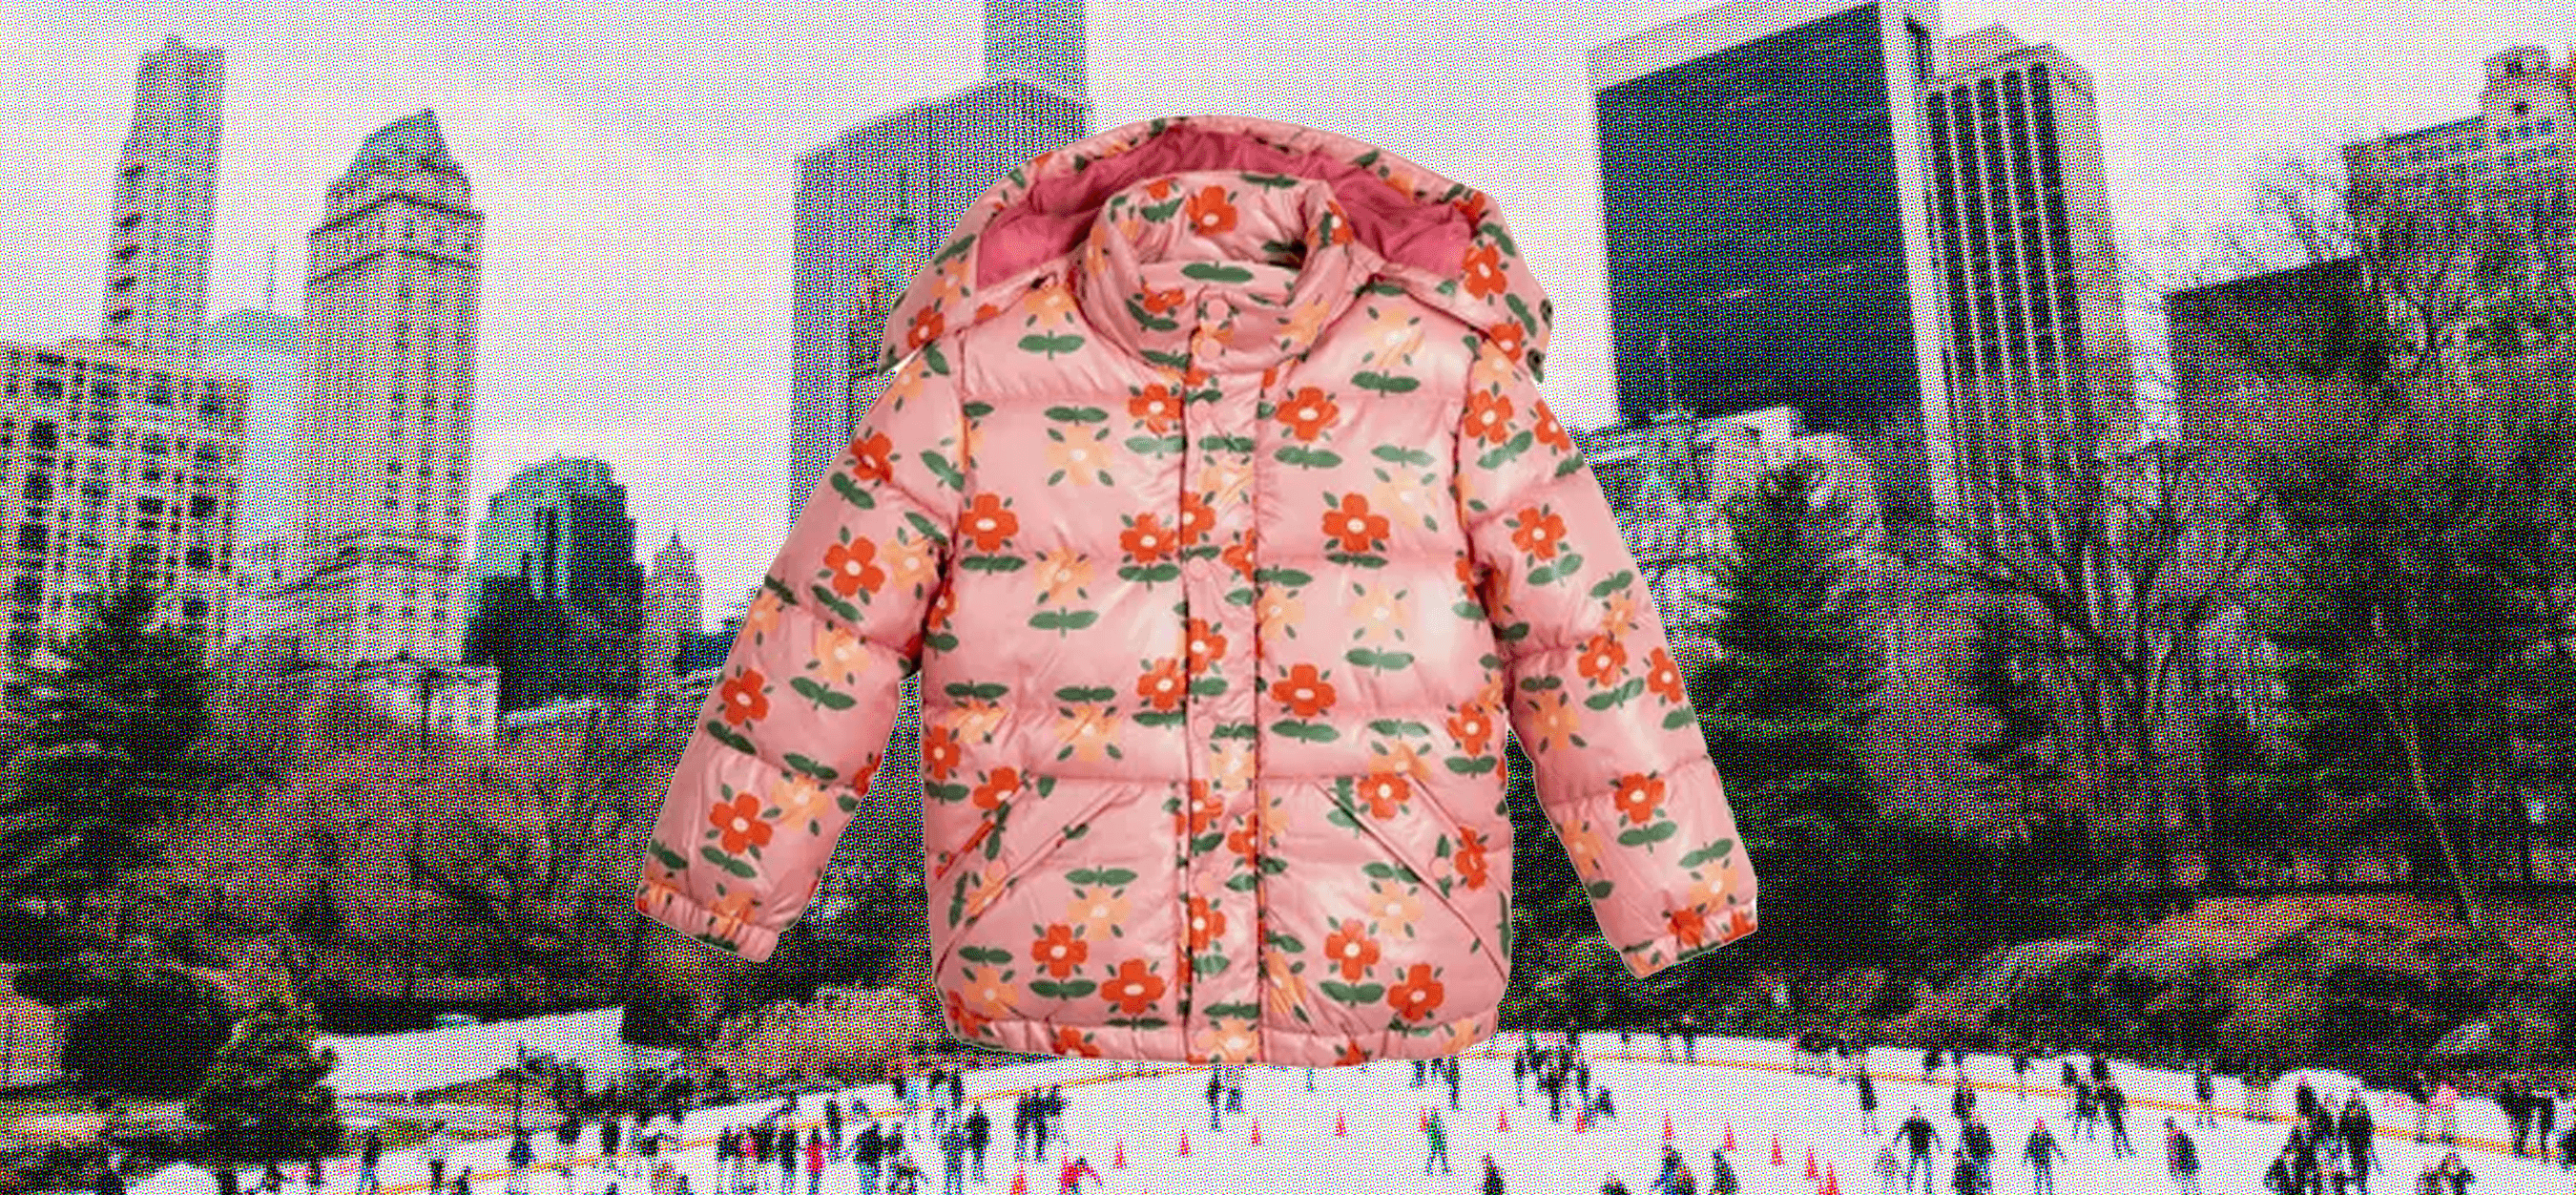 image of kids jacket over Wollman skating rink in New York City winter